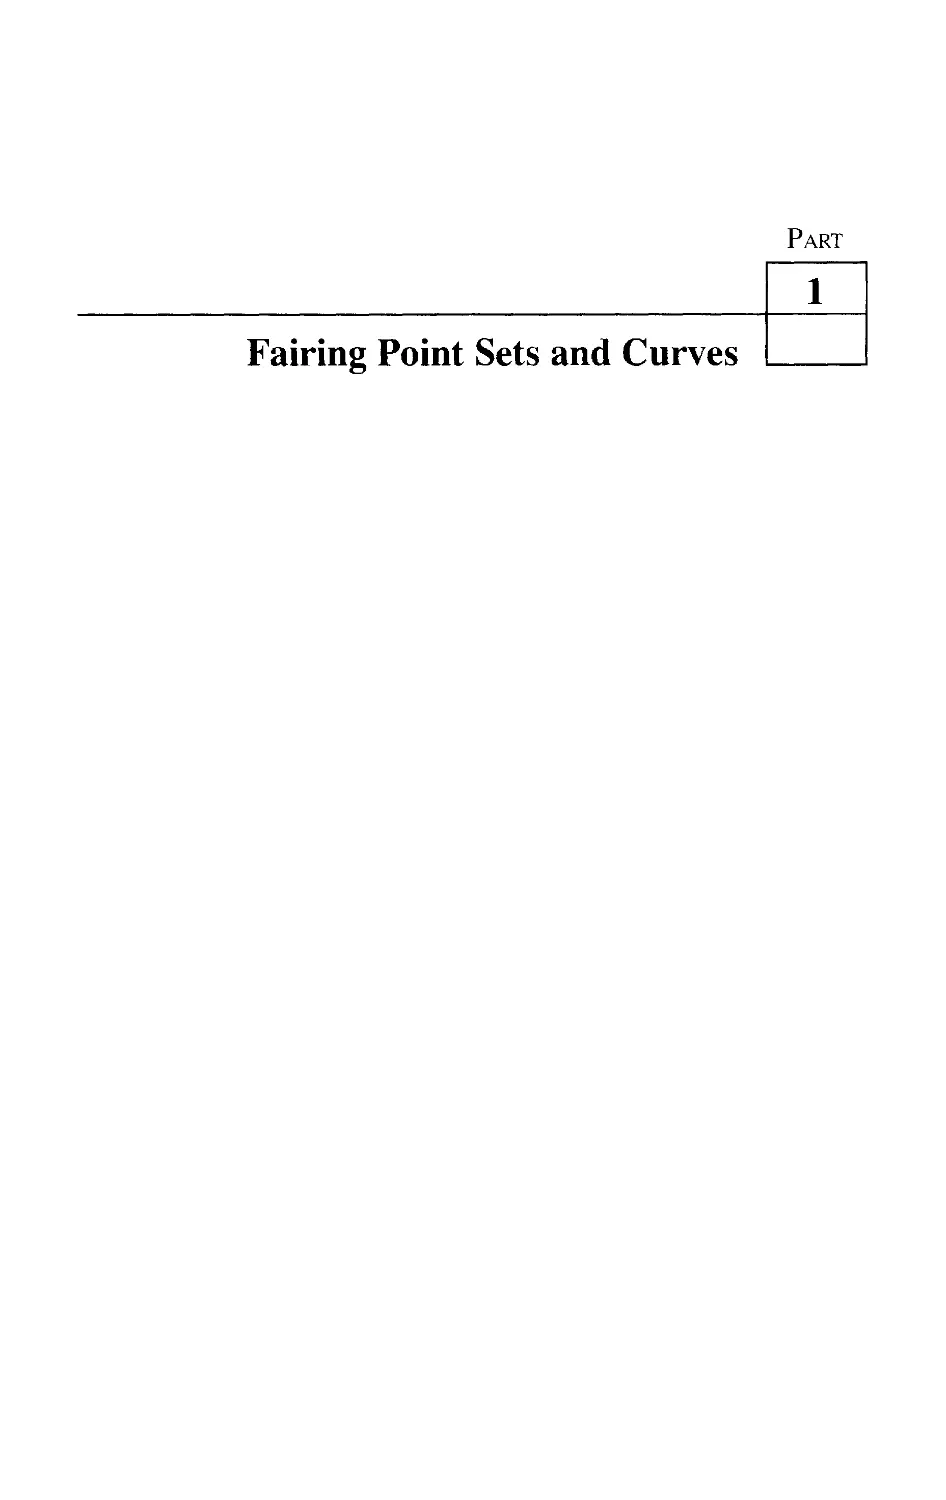 PART 1 Fairing Point Sets and Curves